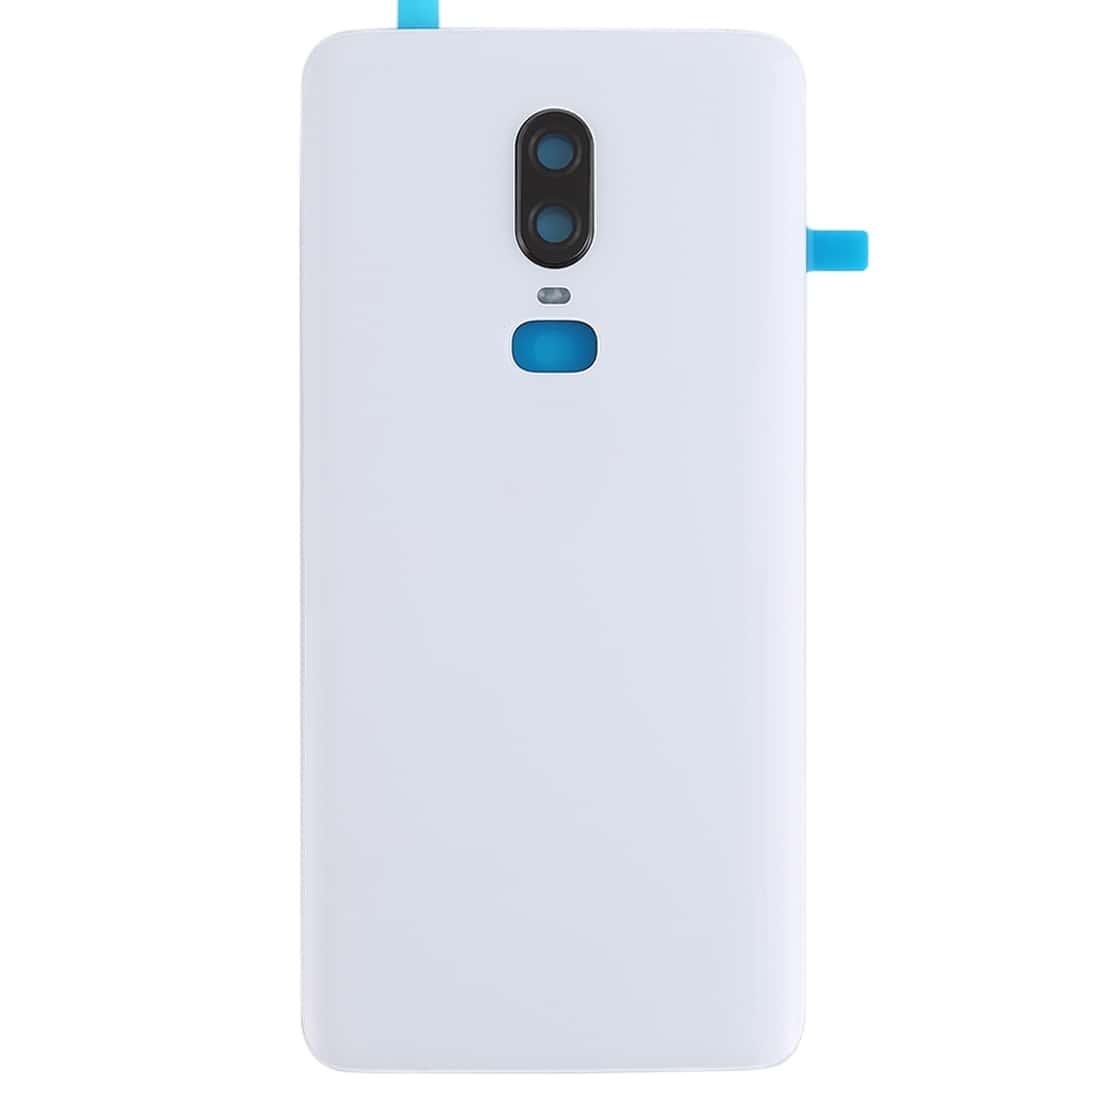 Back Glass Panel for Oneplus 6 White with Camera Lens